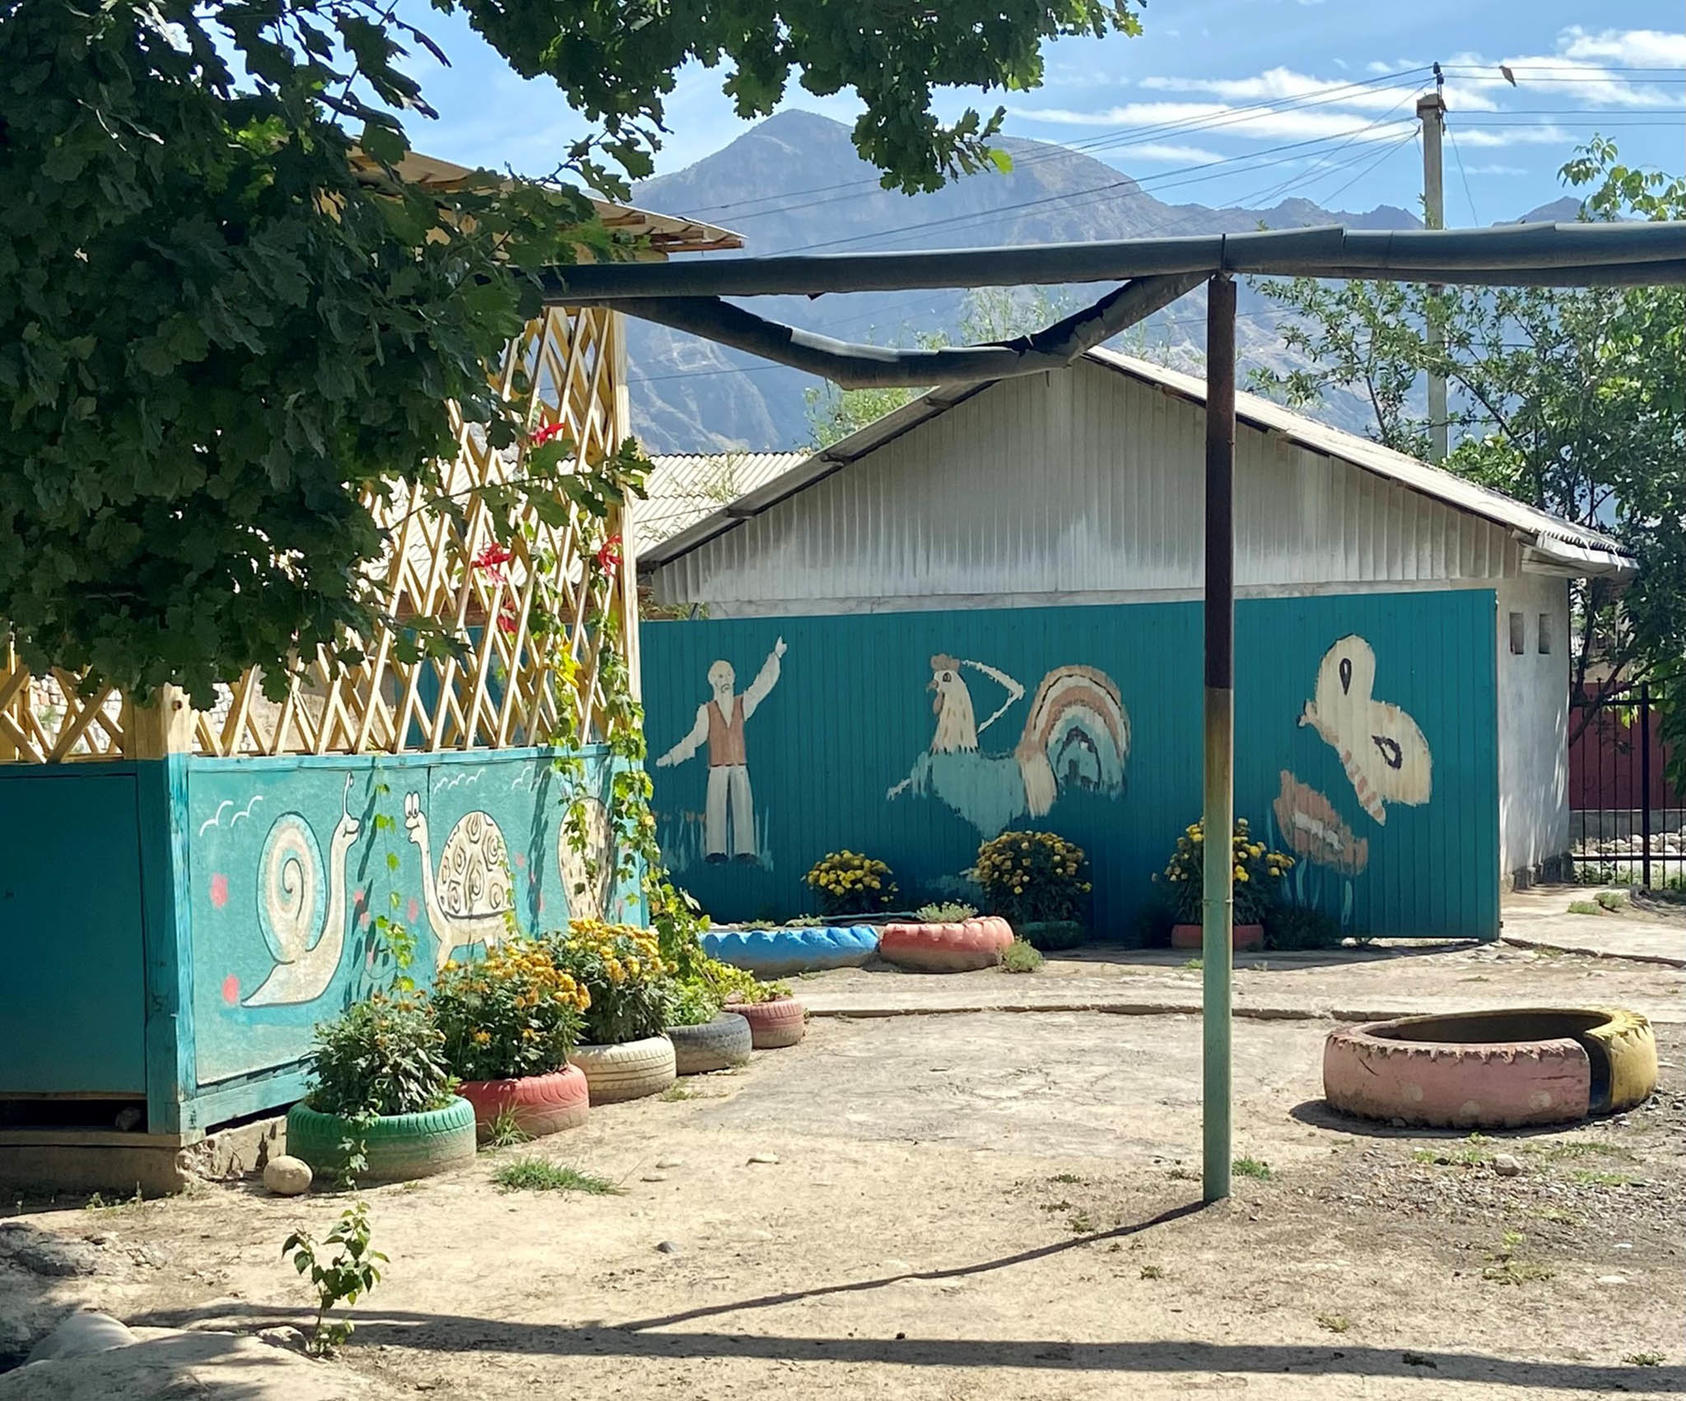 A schoolyard in Aravan, Kyrgyzstan where children repatriated from displacement camps in Iraq are receiving basic education and tutoring, June 2022.